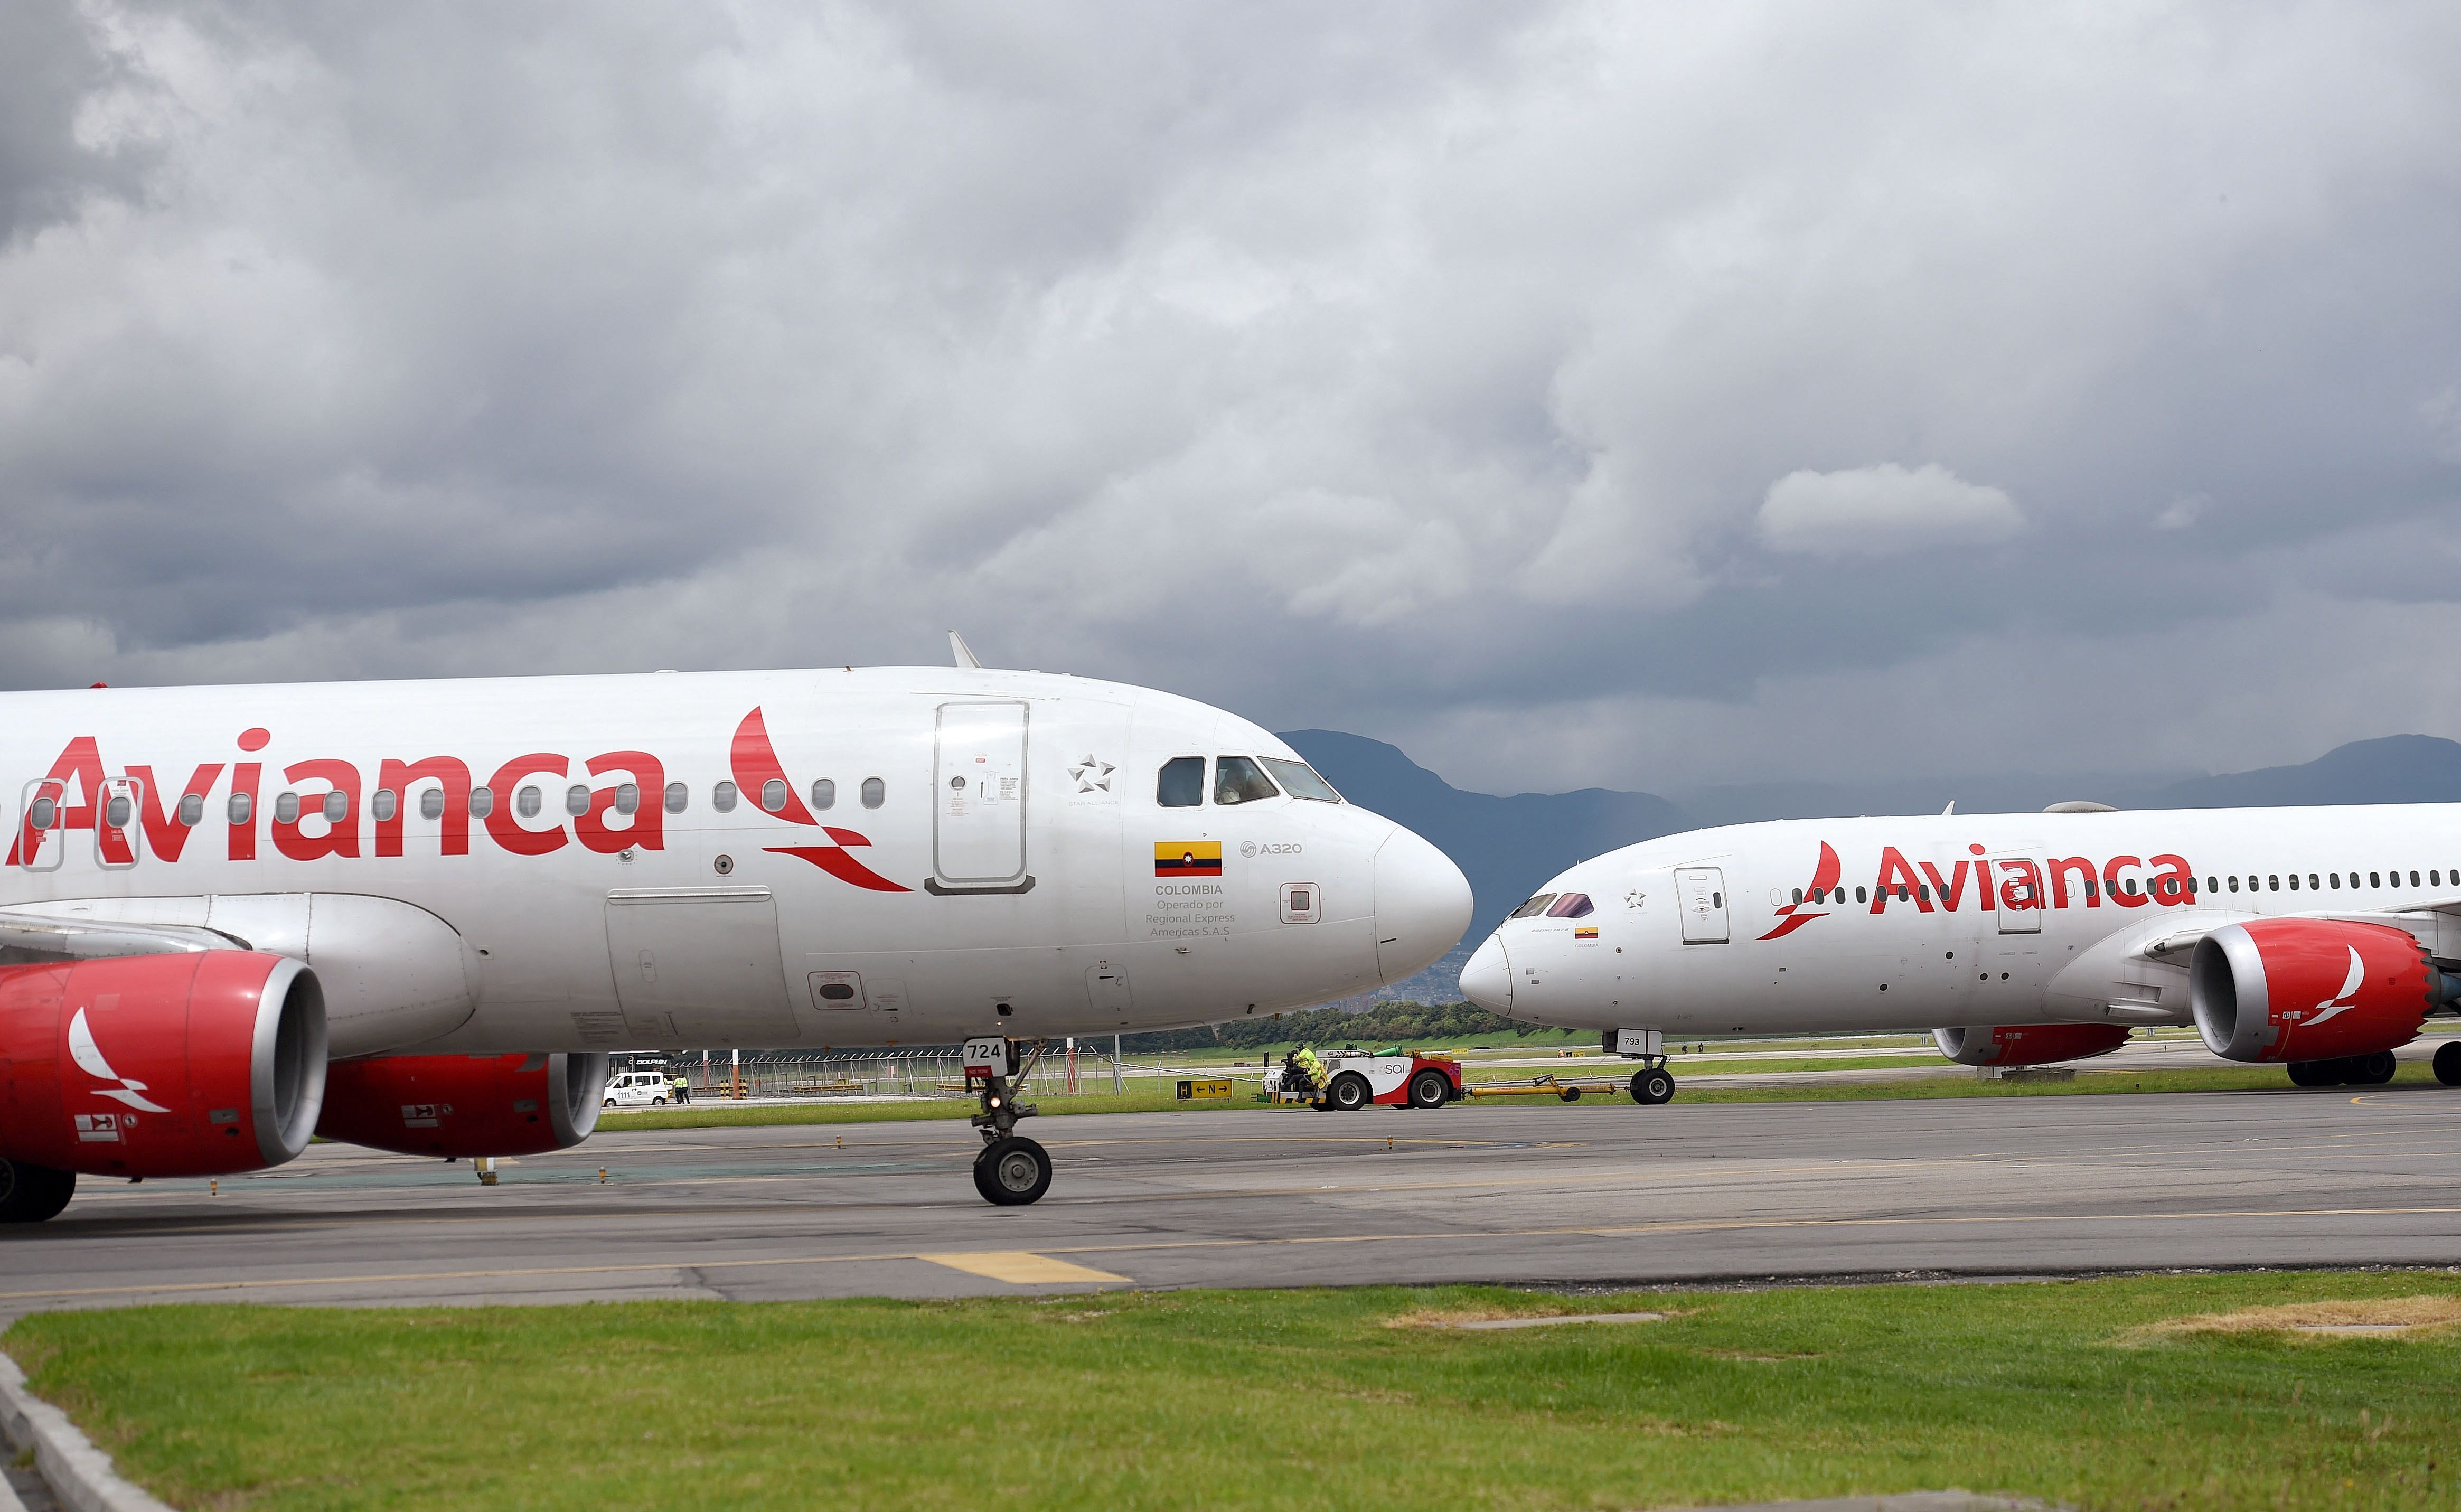 Two Avianca aircraft, an Airbus A320 and a Boeing 787 parked in Bogota. 